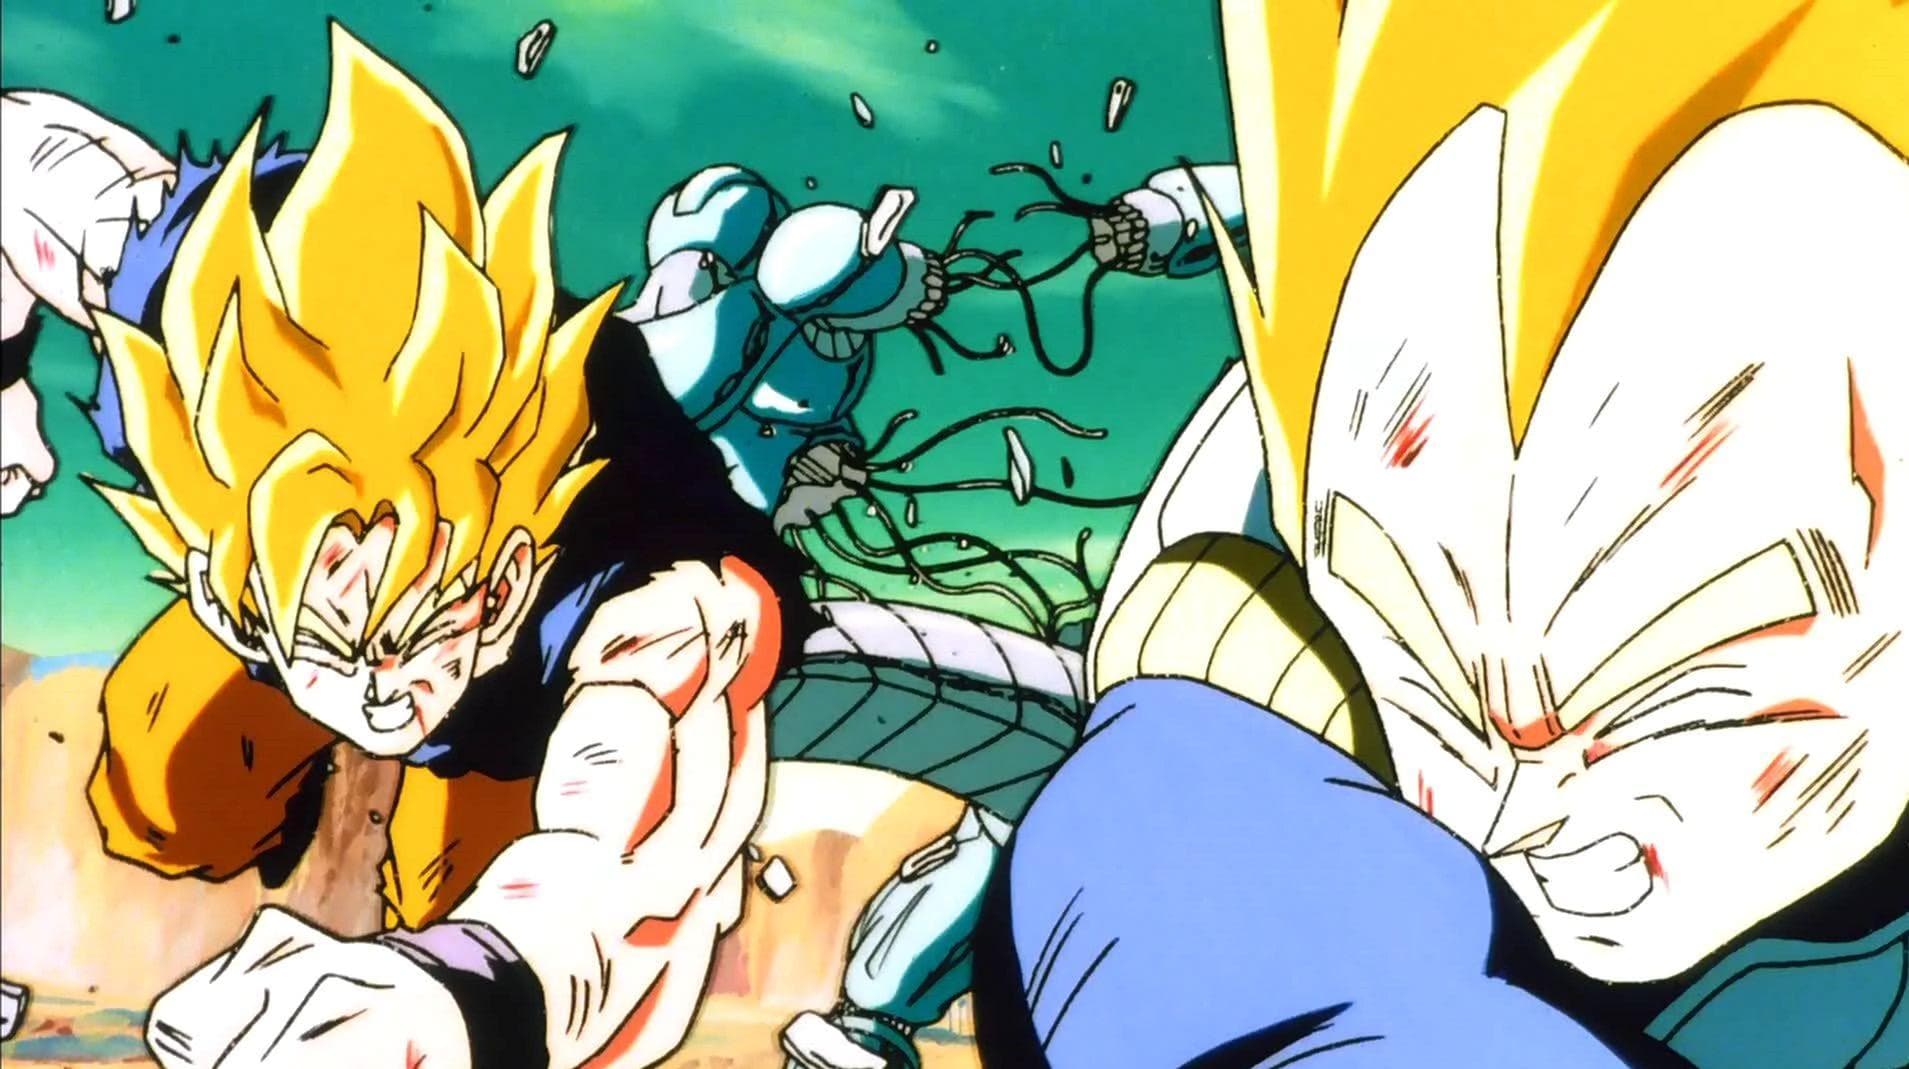 Random Theories About Why Vegeta Never Surpasses Goku In The 'Dragon Ball' Series